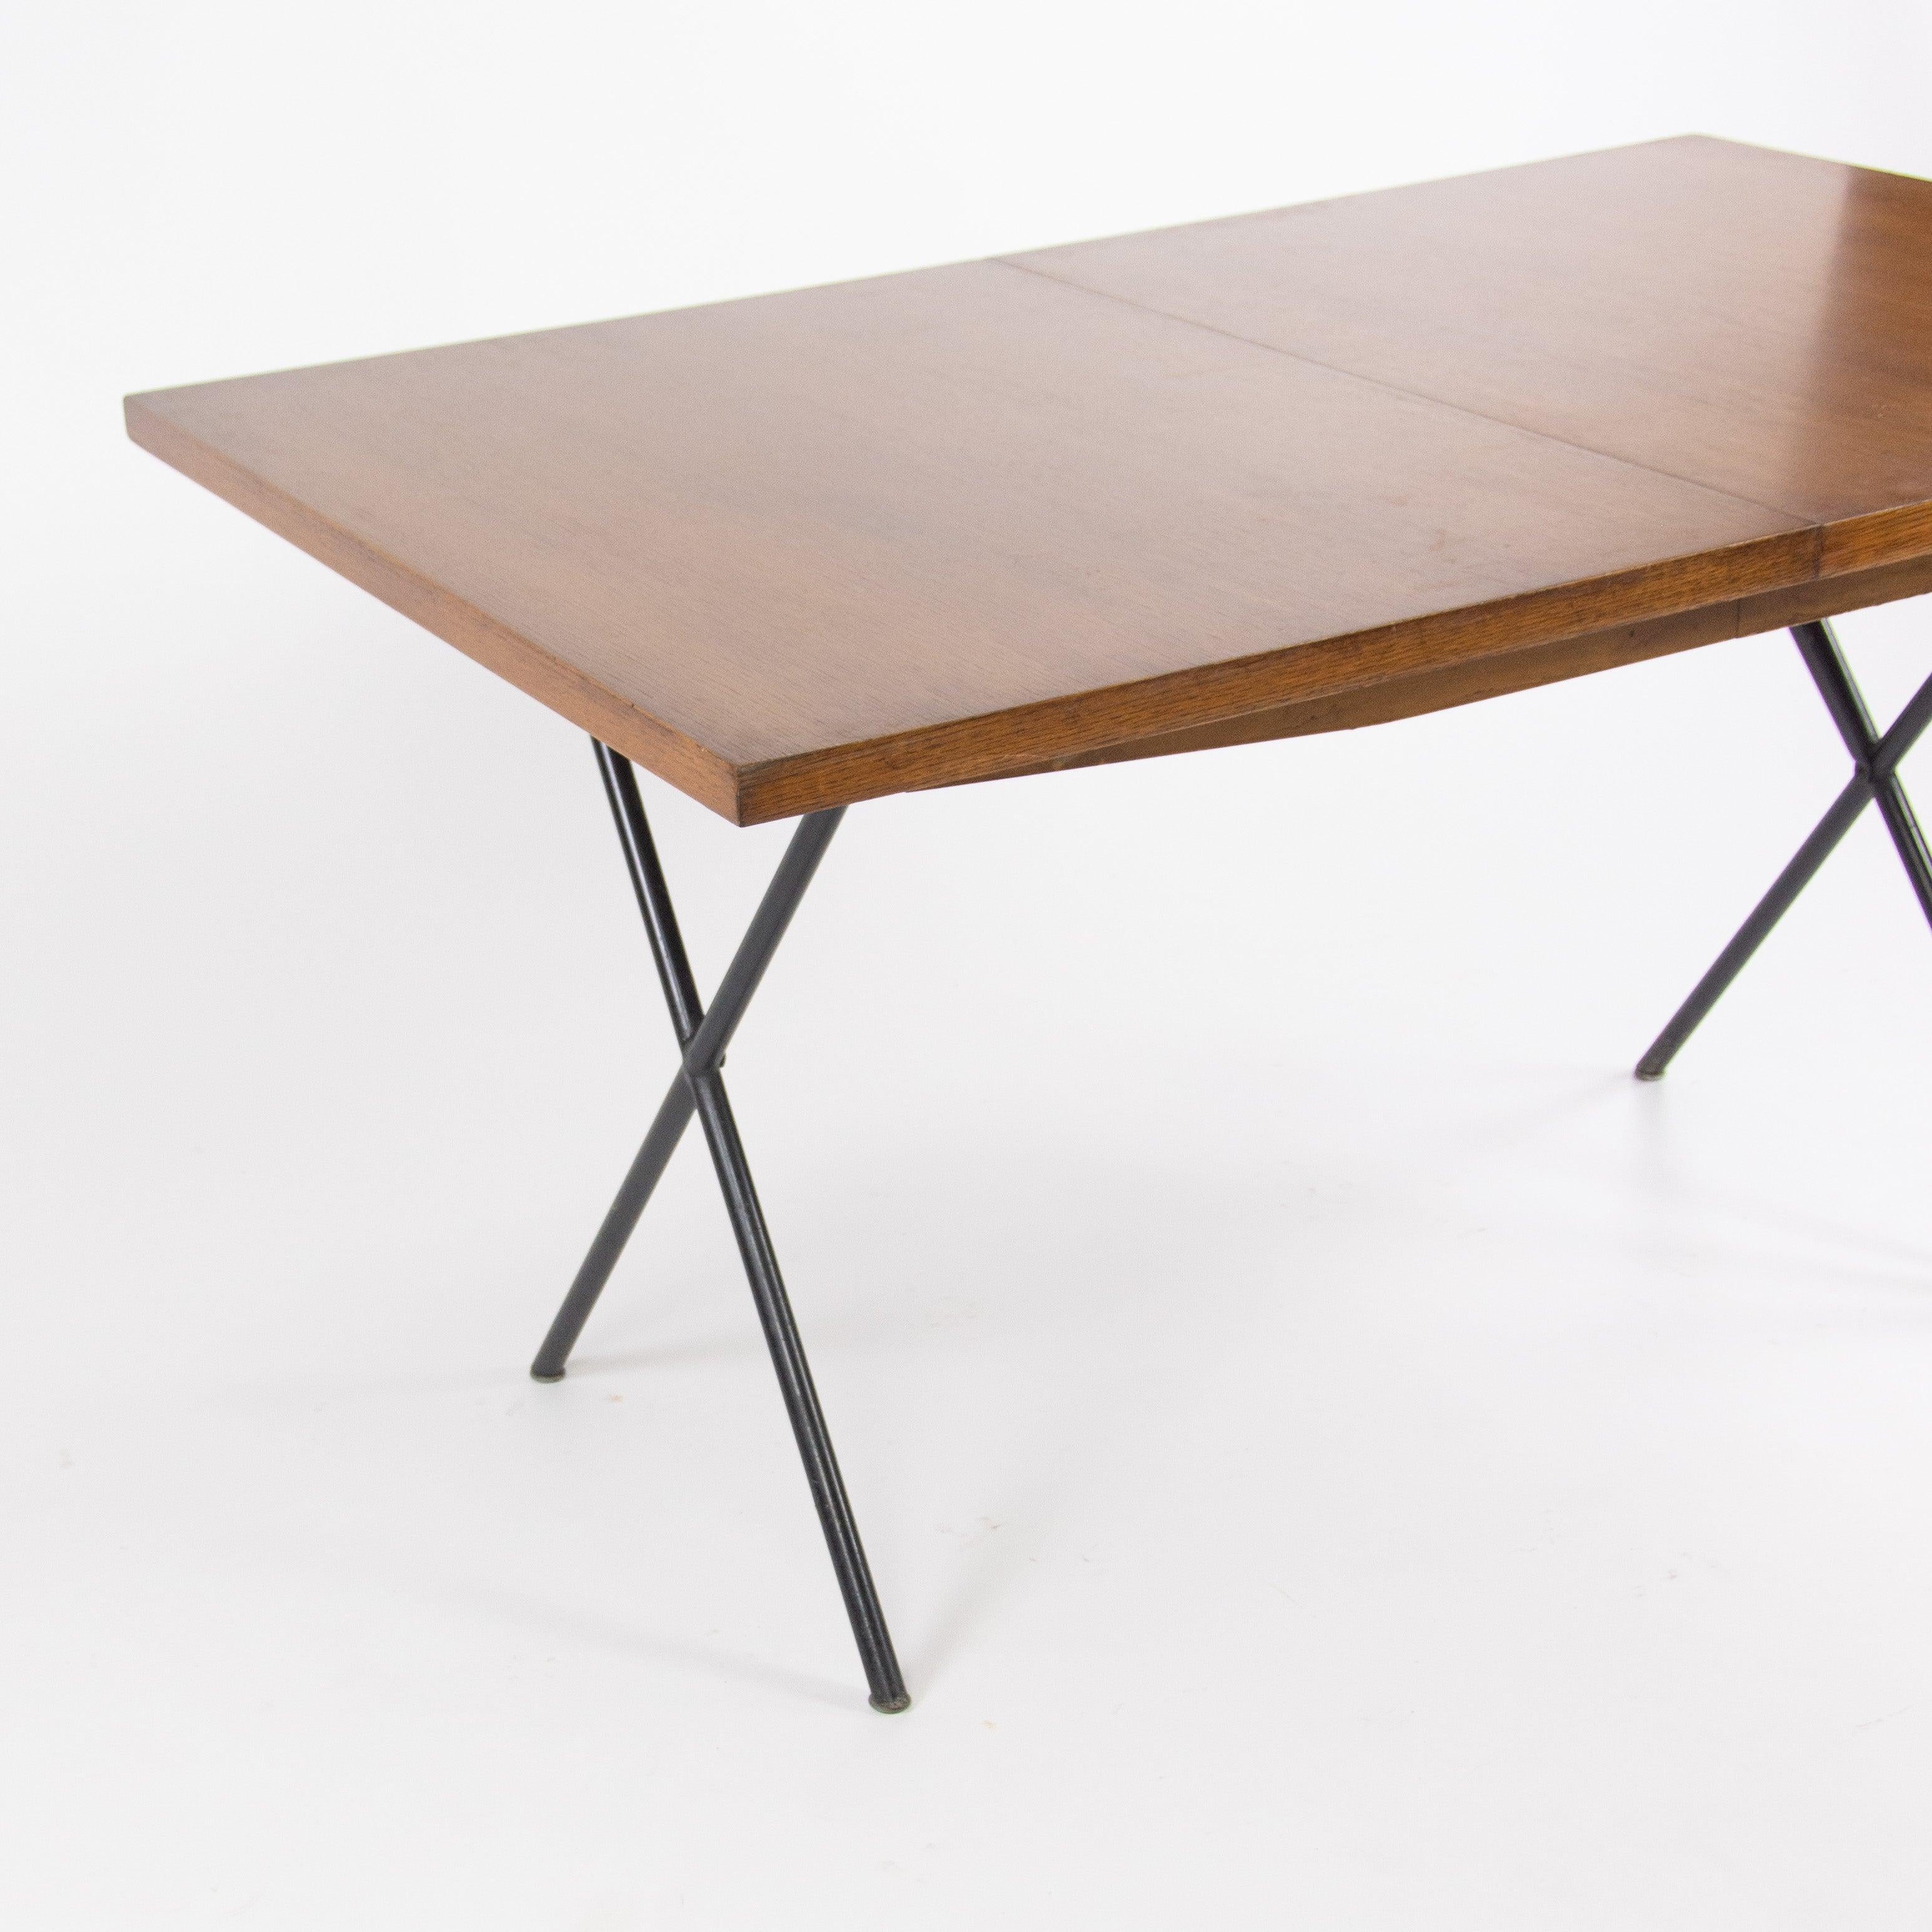 Mid-20th Century 1950's Original George Nelson Herman Miller X Leg Extension Dining Table 5260 For Sale